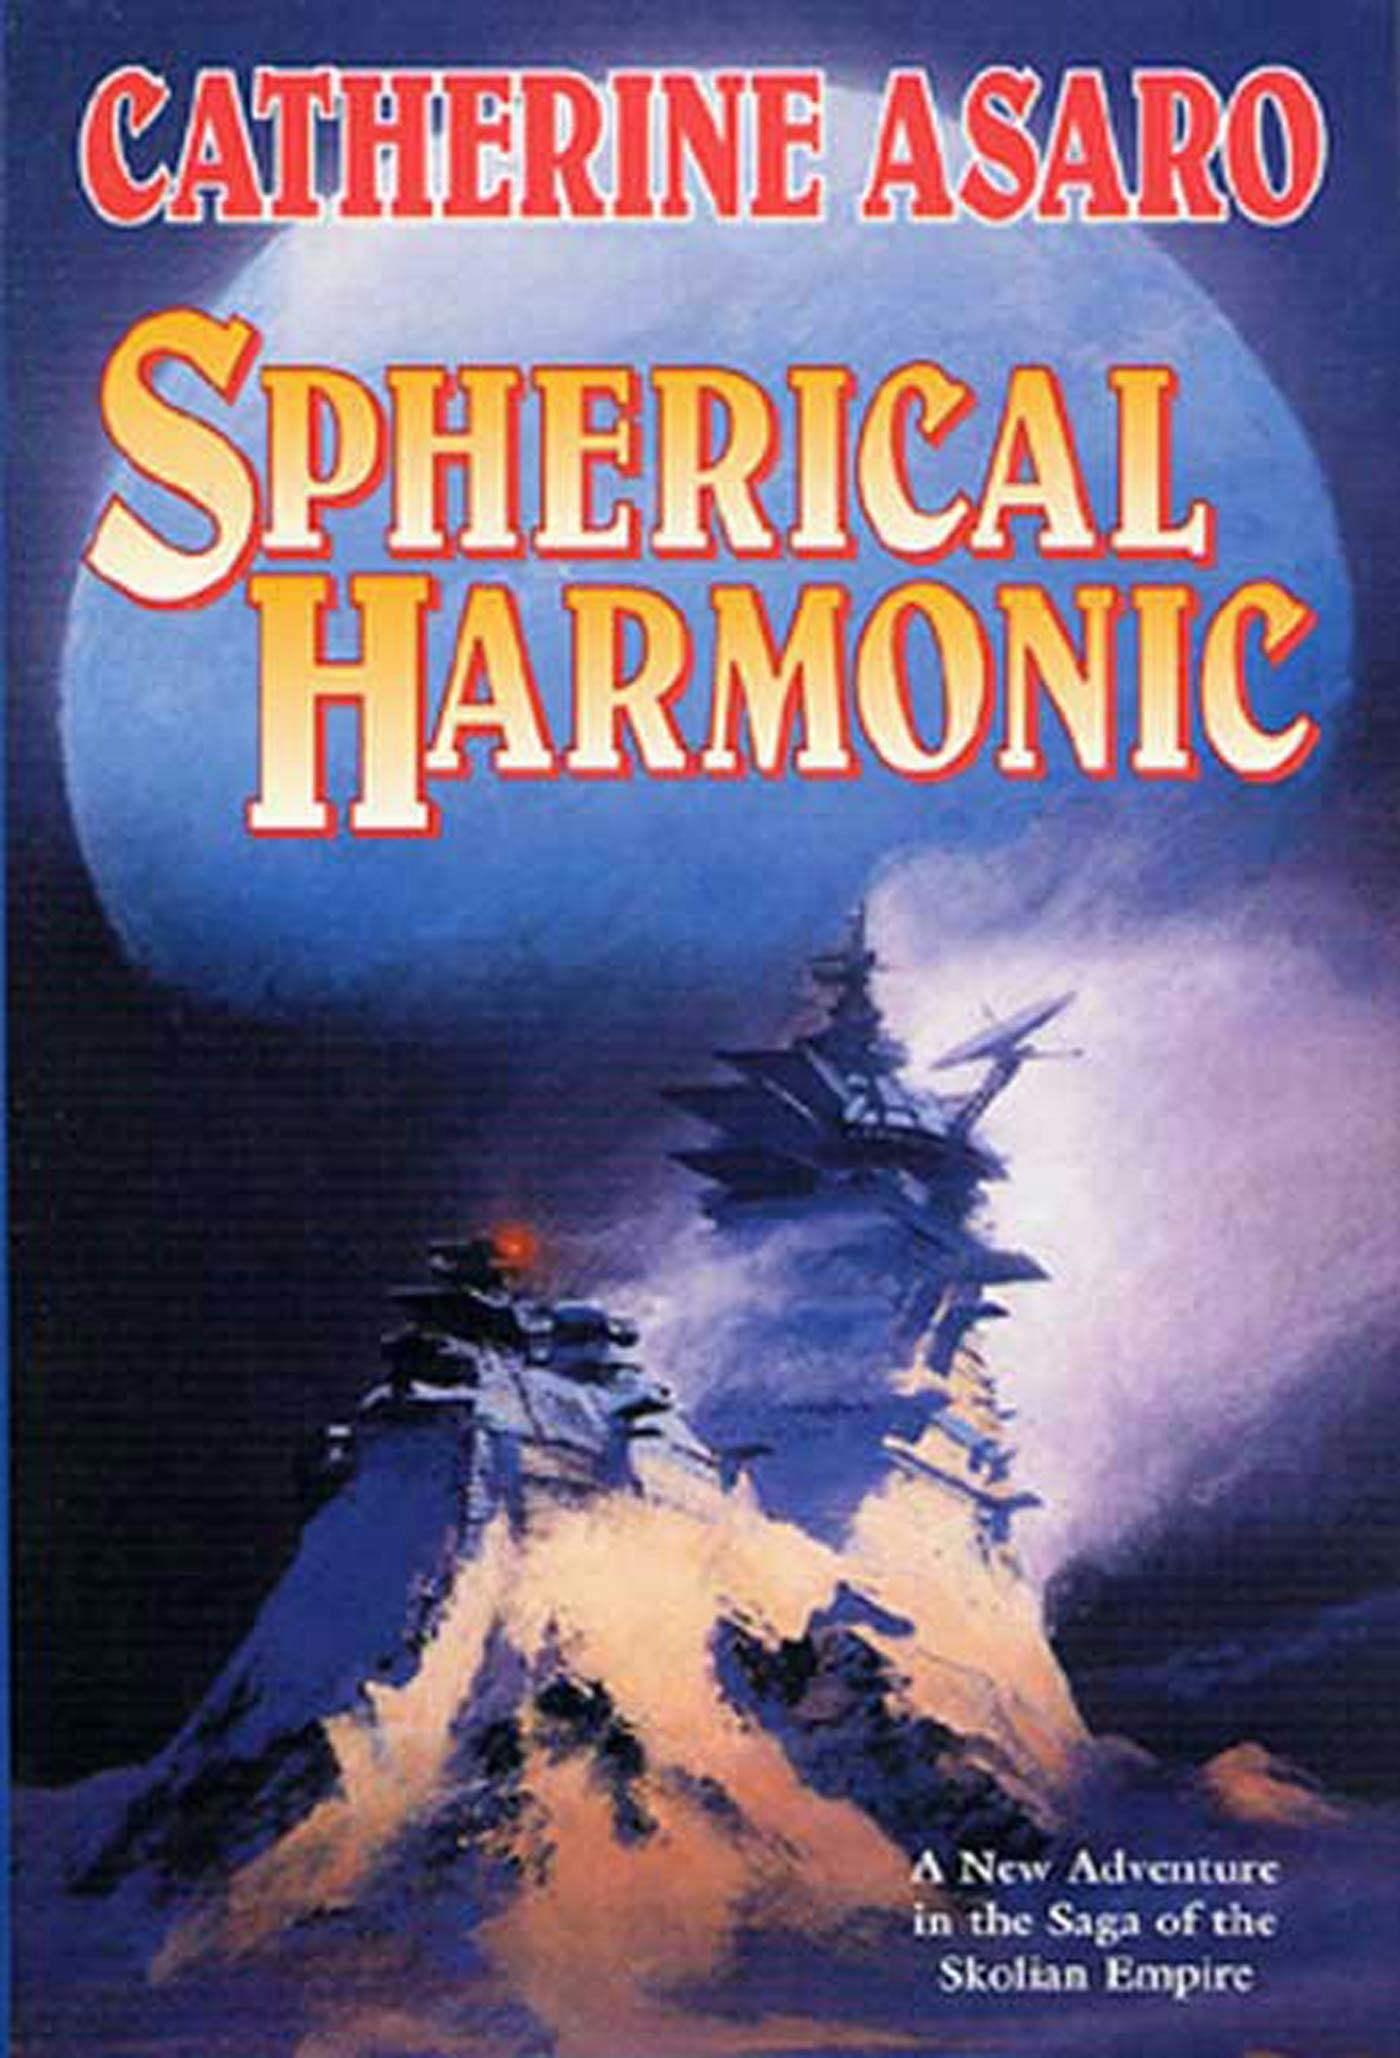 Cover for the book titled as: Spherical Harmonic